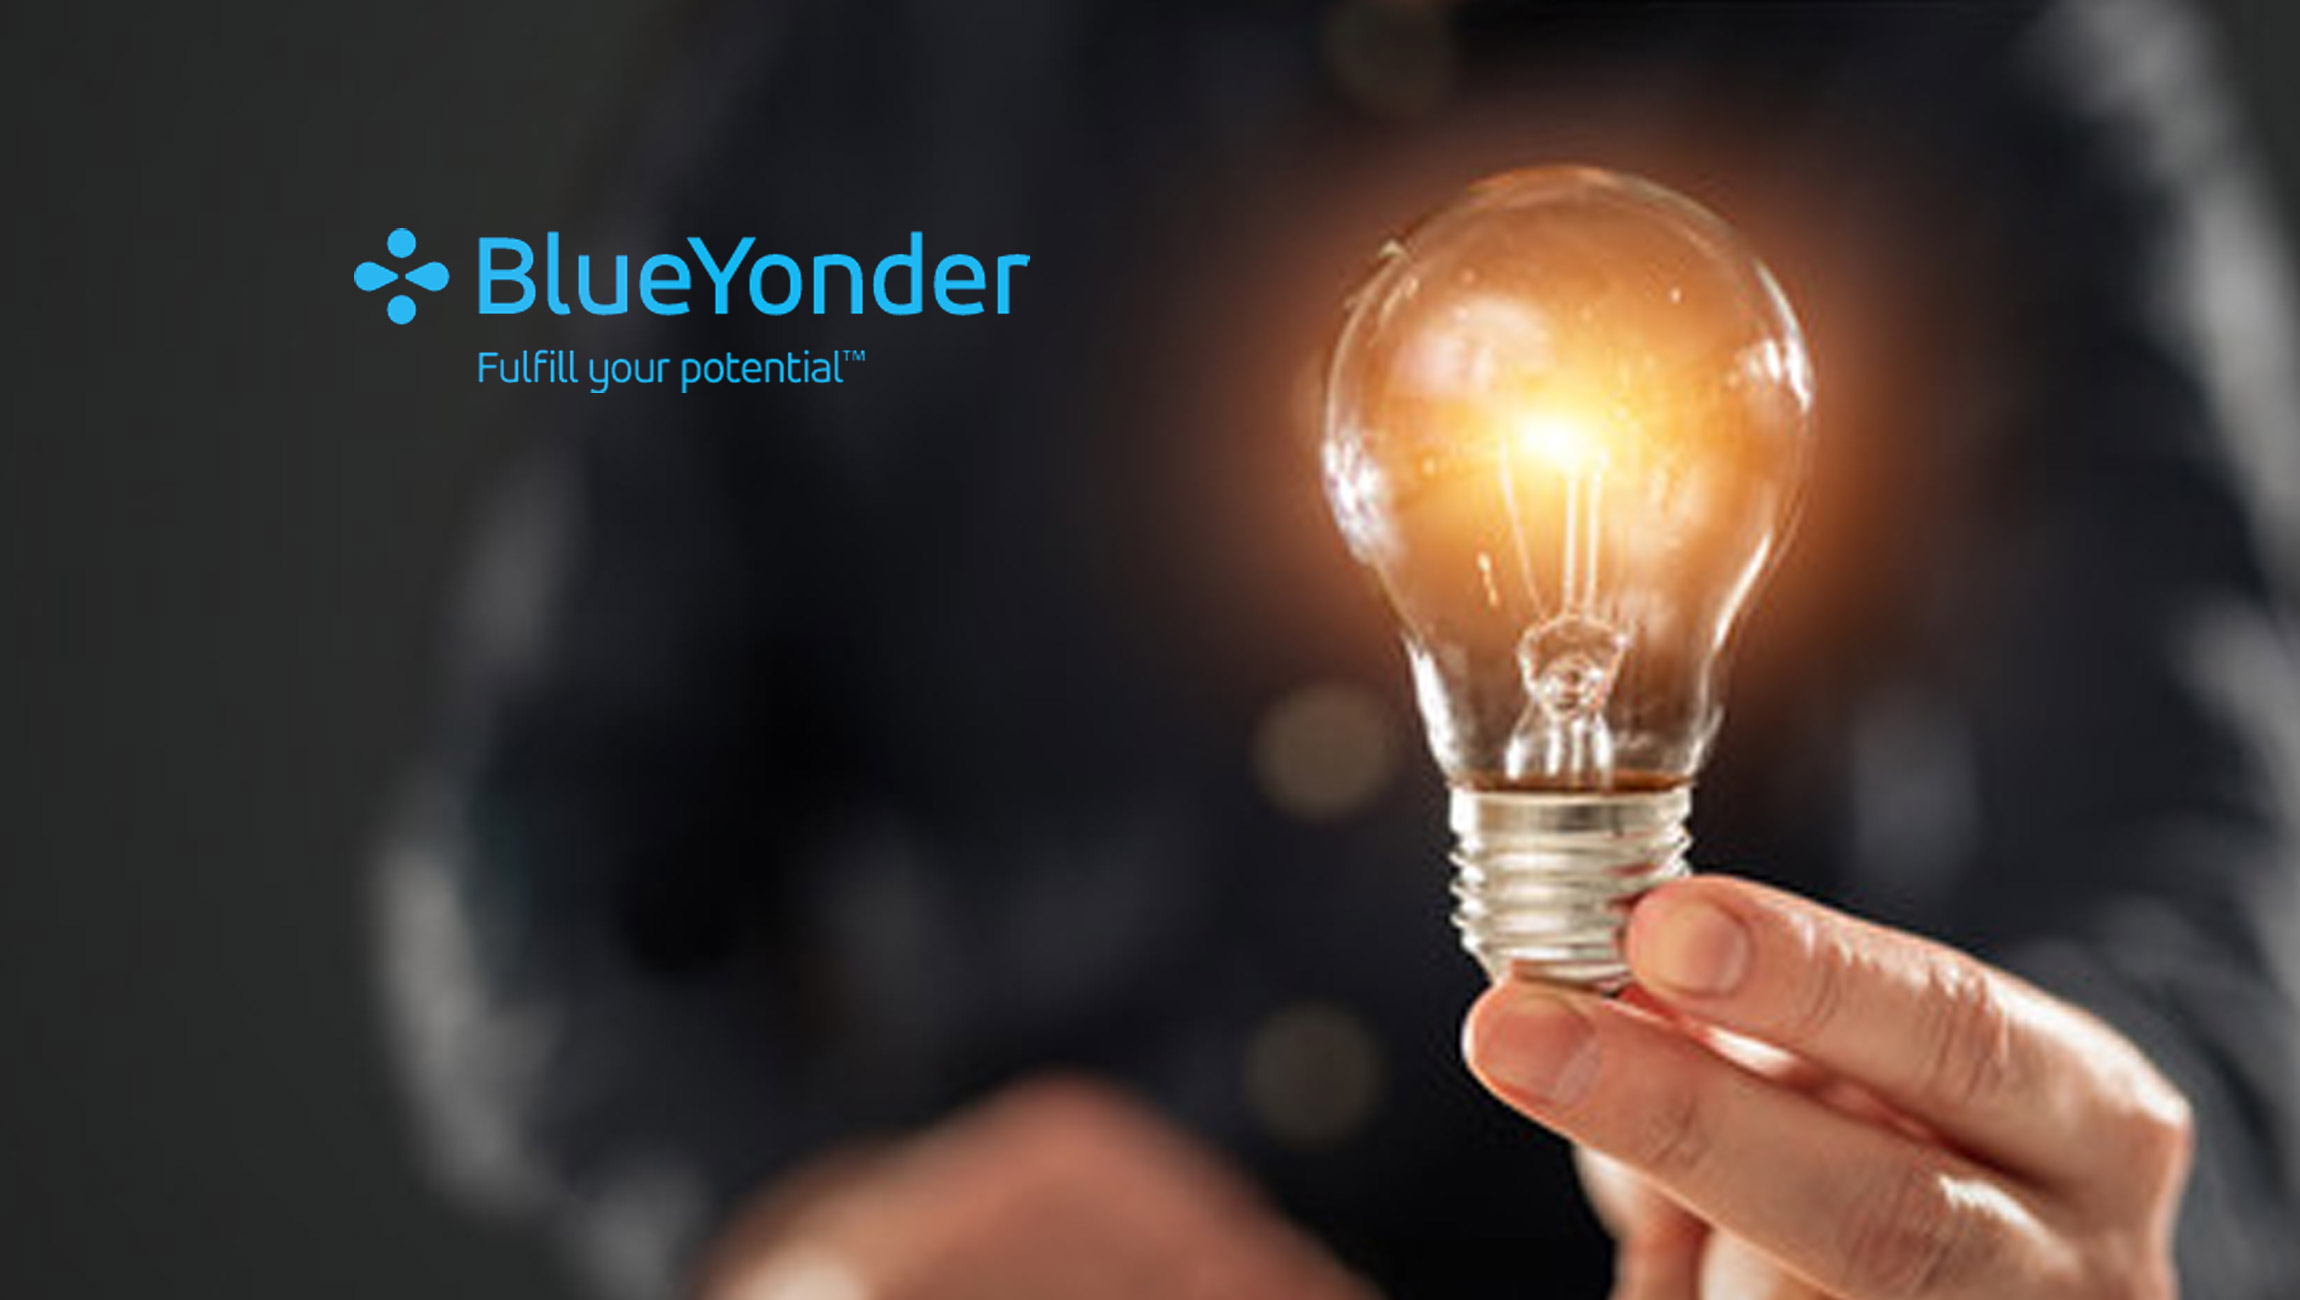 Blue Yonder Launches Generative AI Capability To Dramatically Simplify Supply Chain Management and Orchestration